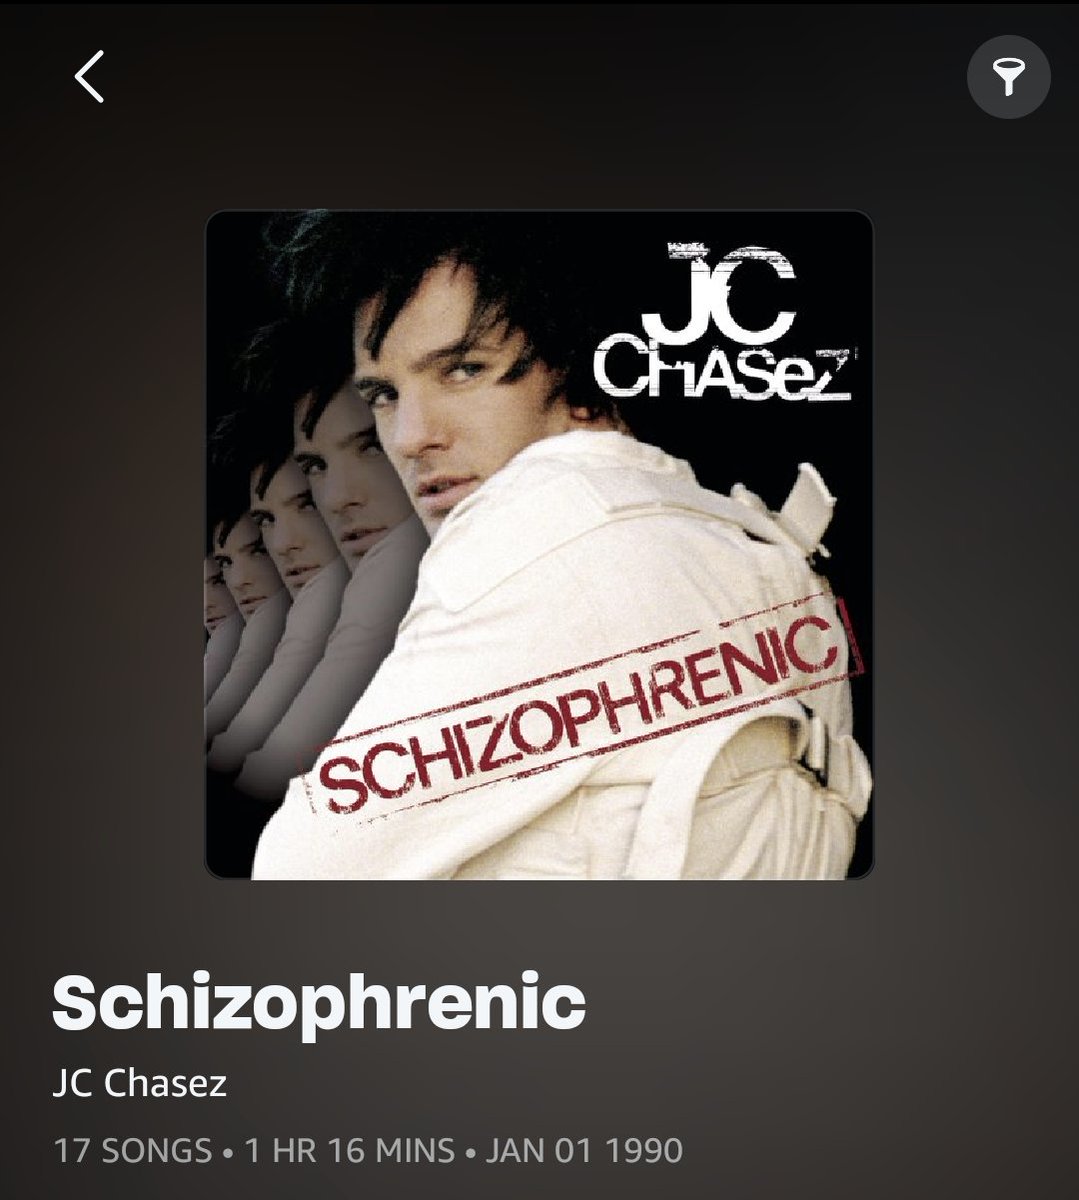 Also @amazonmusic can you fix the date on #JCChasez album?